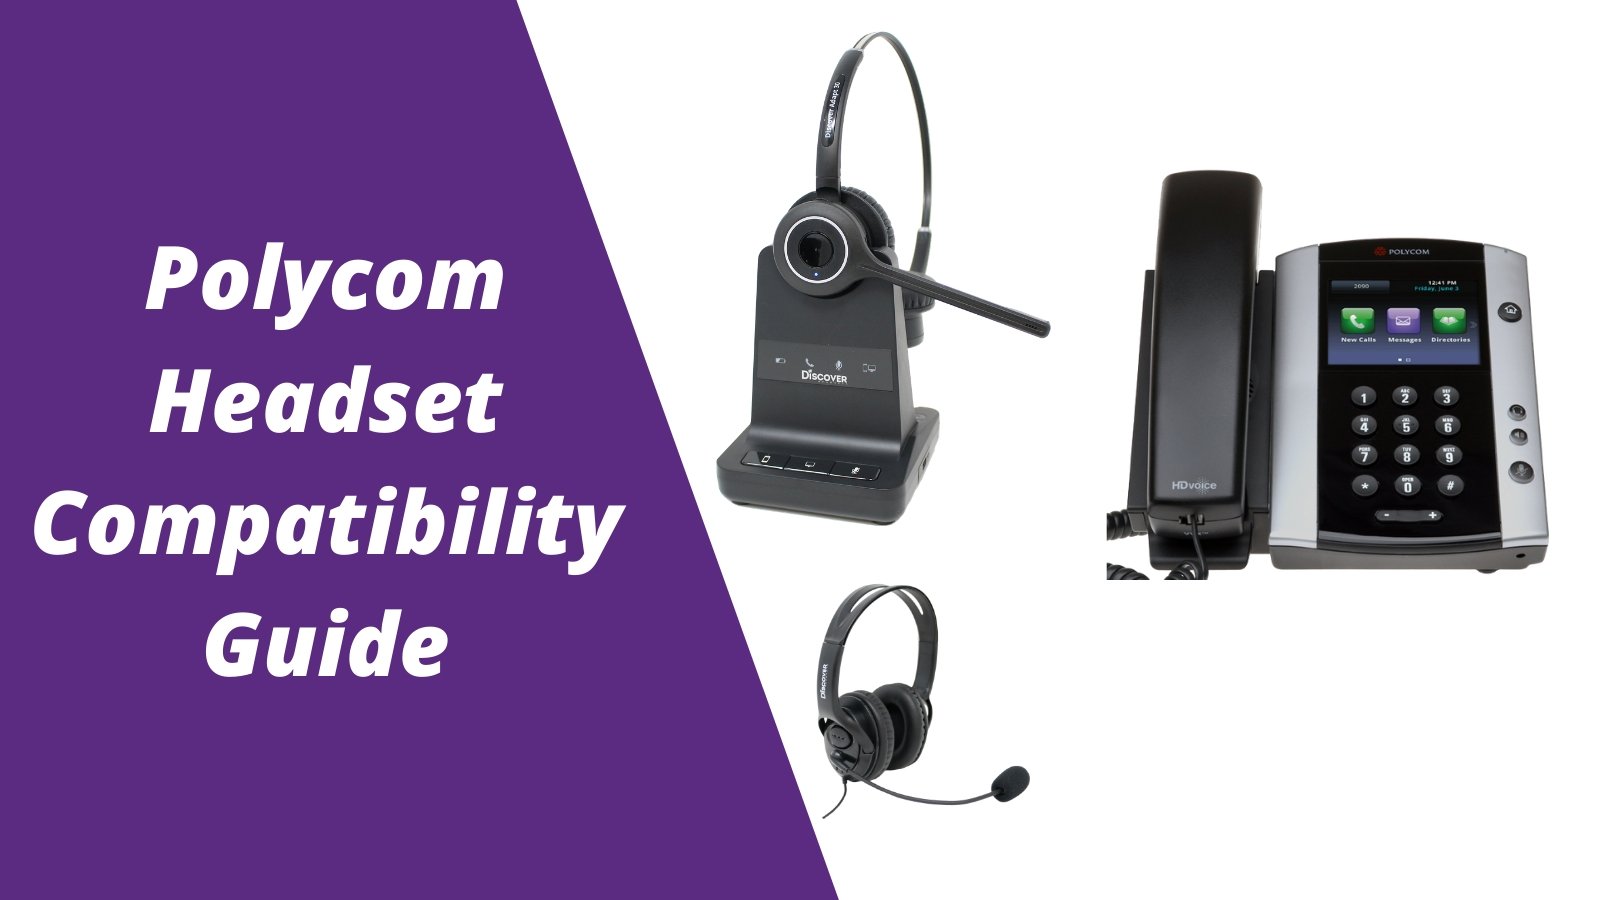 Polycom Headset Compatibility Guide: Everything You Need To Know - Headset Advisor